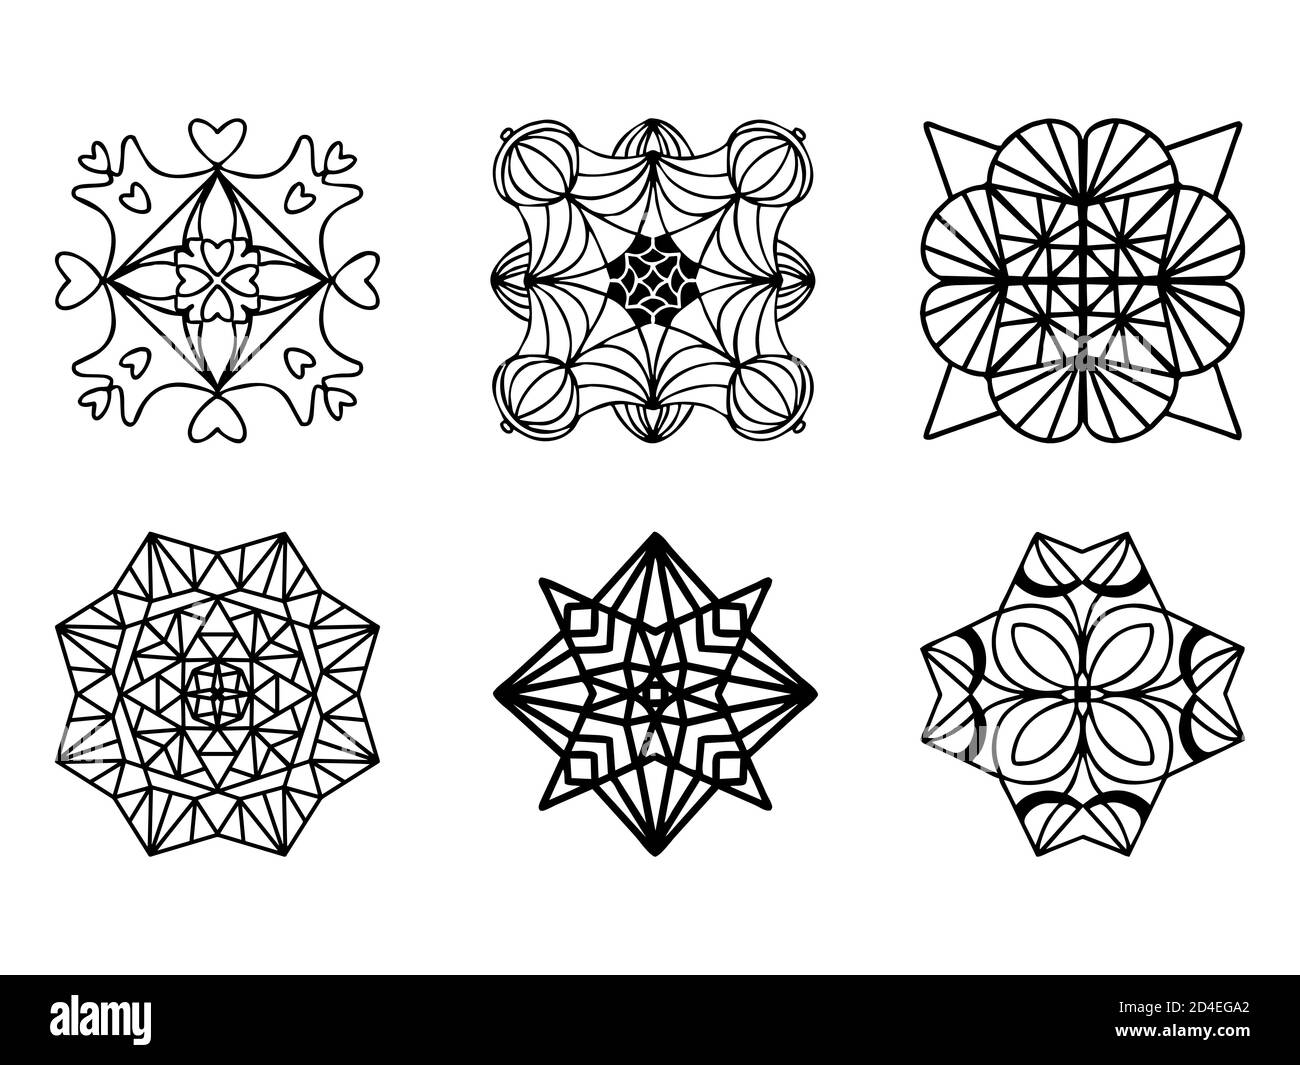 Black and white patterns. Tiles design. Coloring page. Isolated on a white background. Vector illustration. Stock Vector